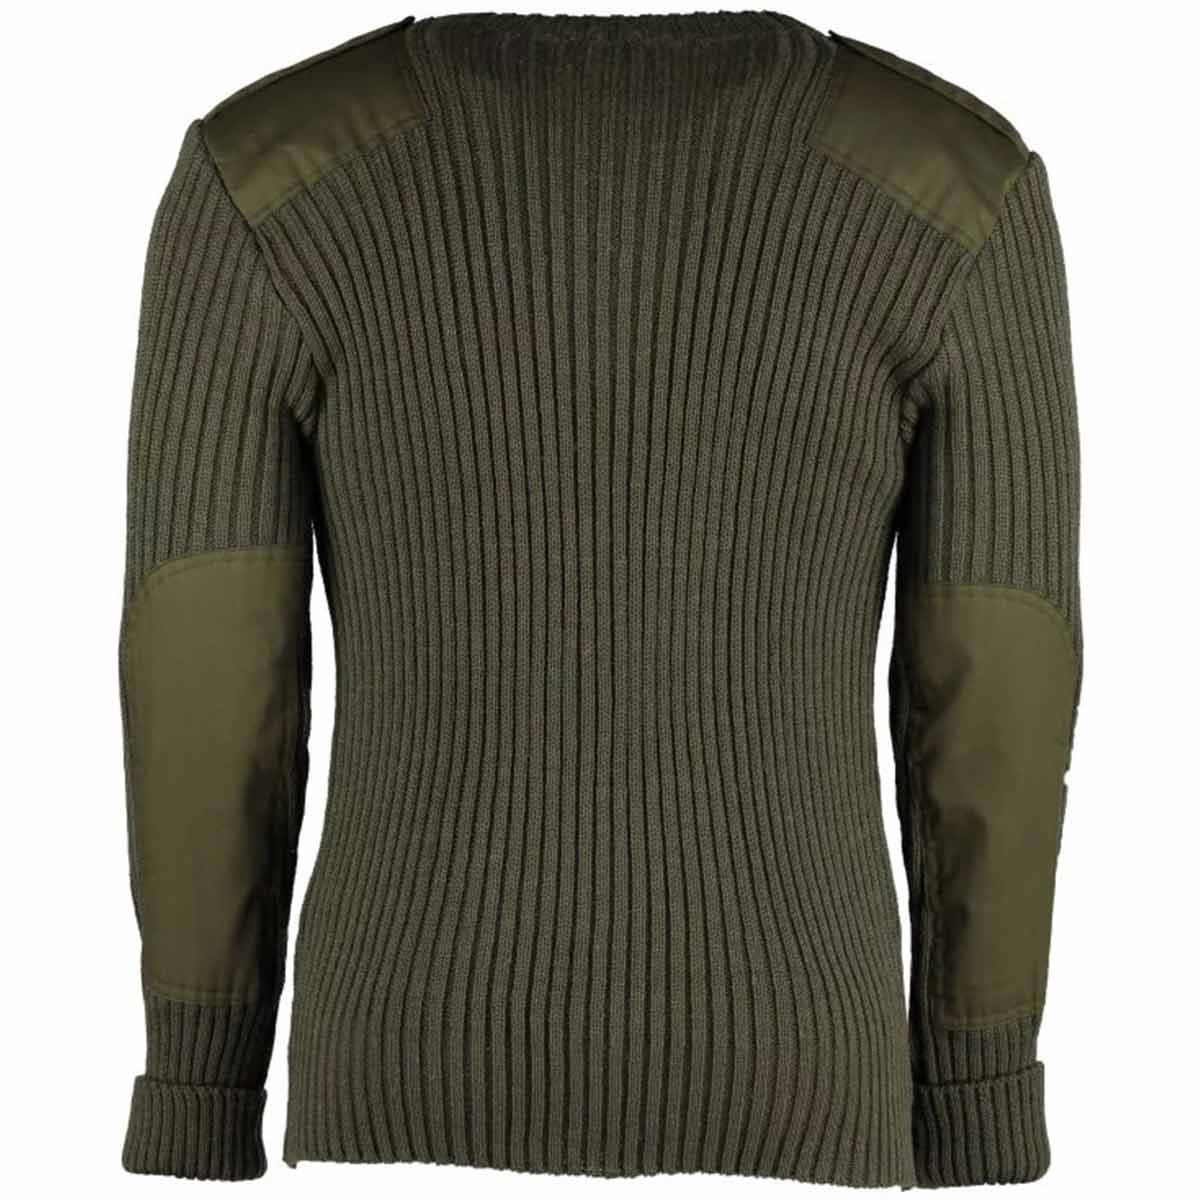 Army Wooly Pully Wool Commando Jumper Sweater Shoulder Elbow Patches ...